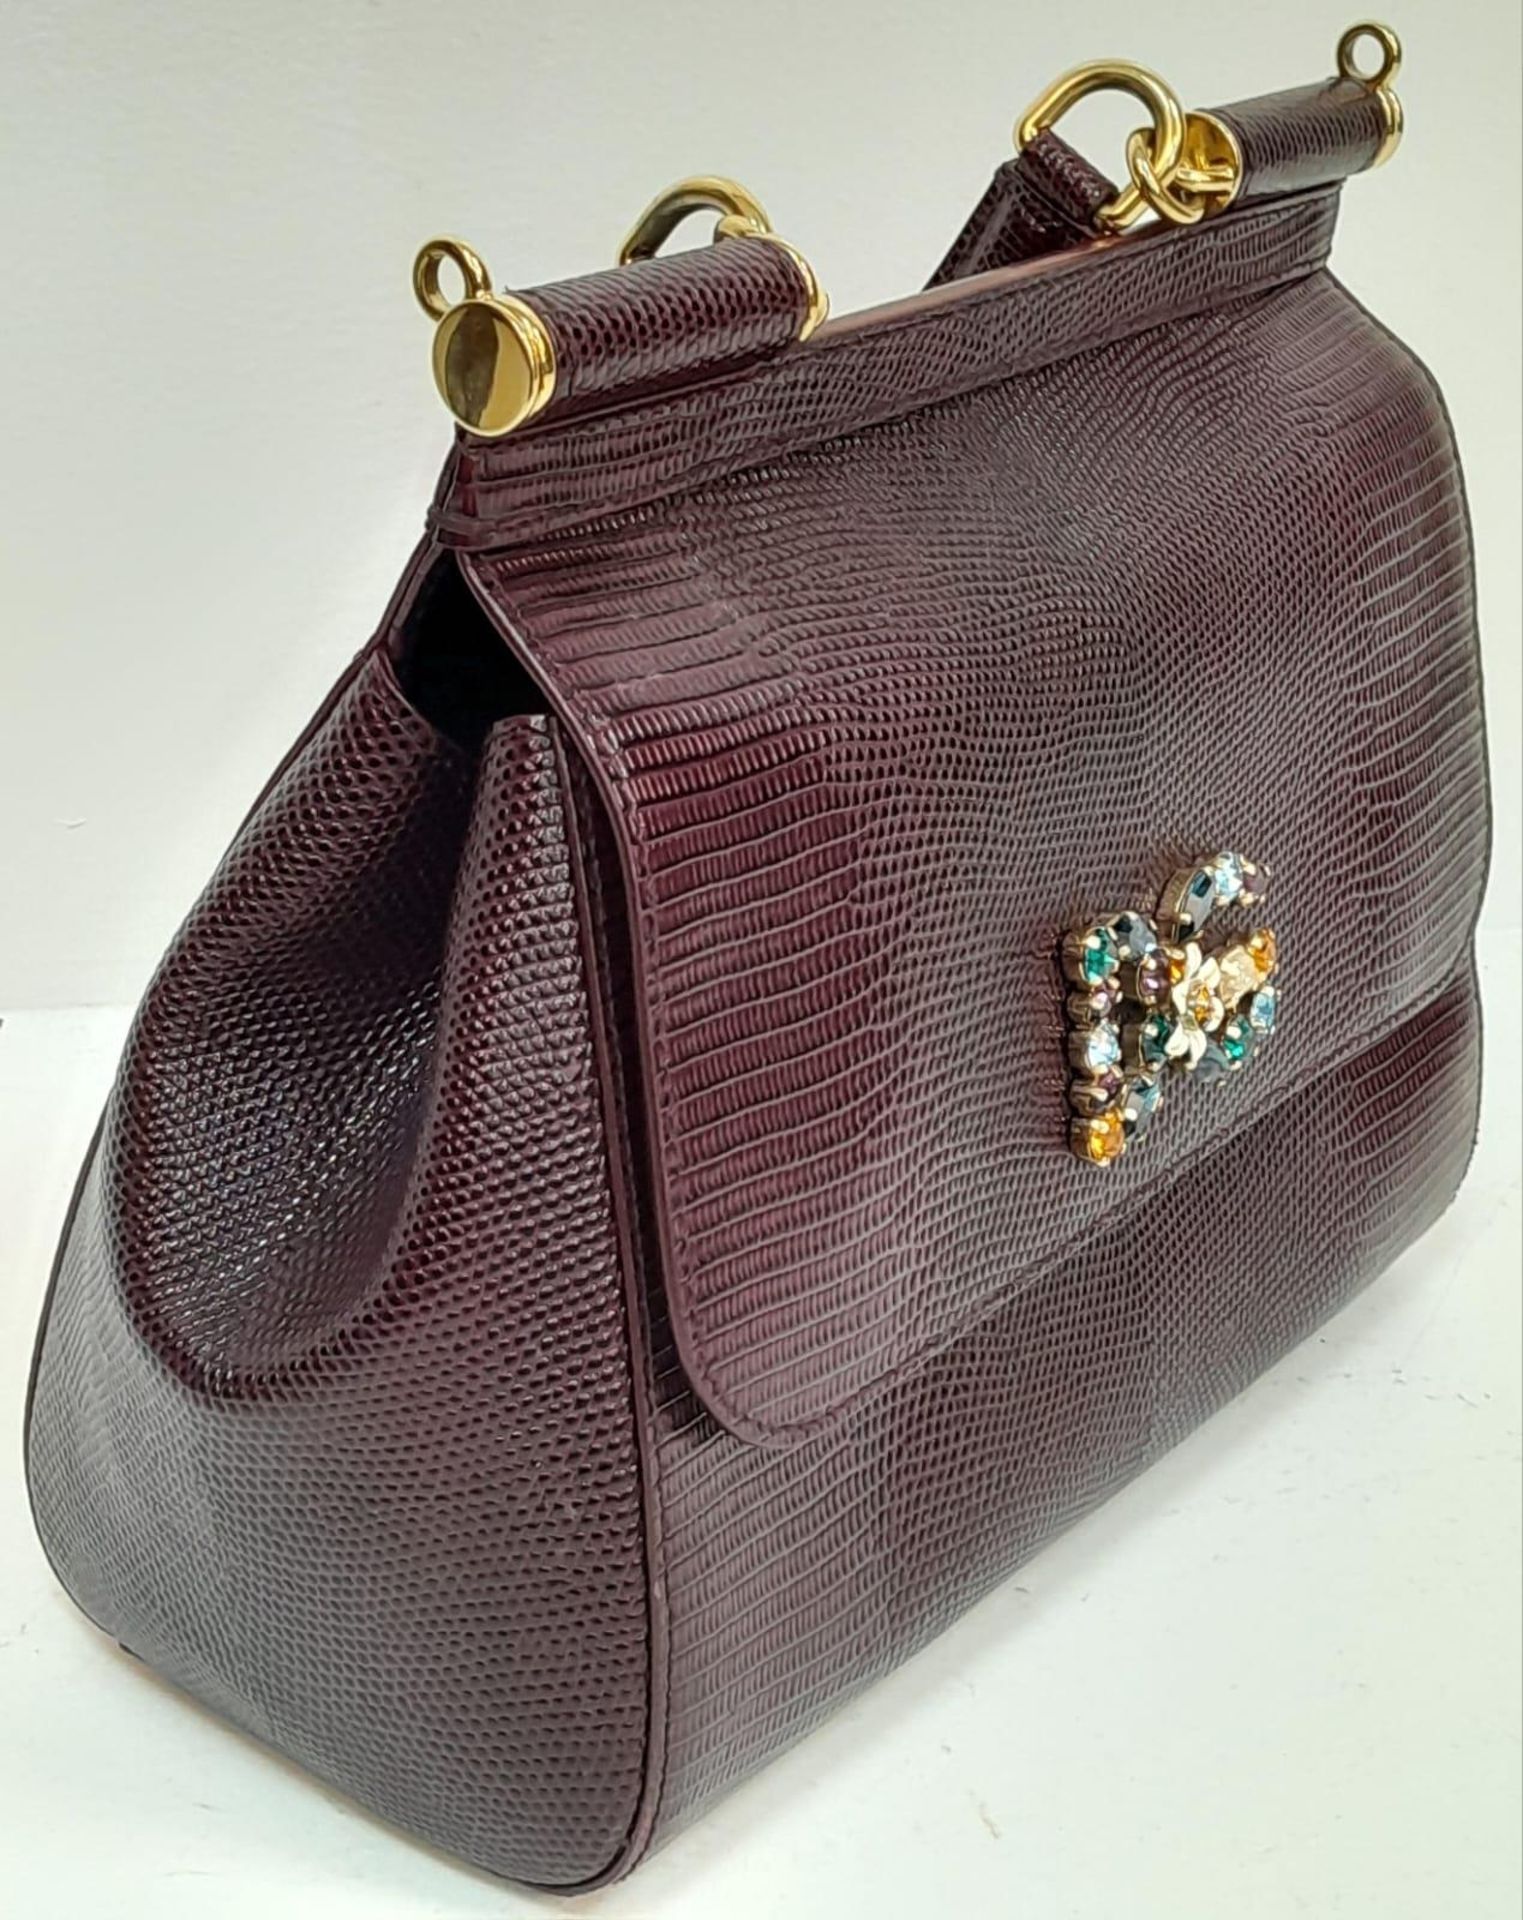 A Dolce & Gabbana Burgundy Miss Sicily Bag. Reptile embossed leather exterior with gold-toned - Bild 4 aus 6